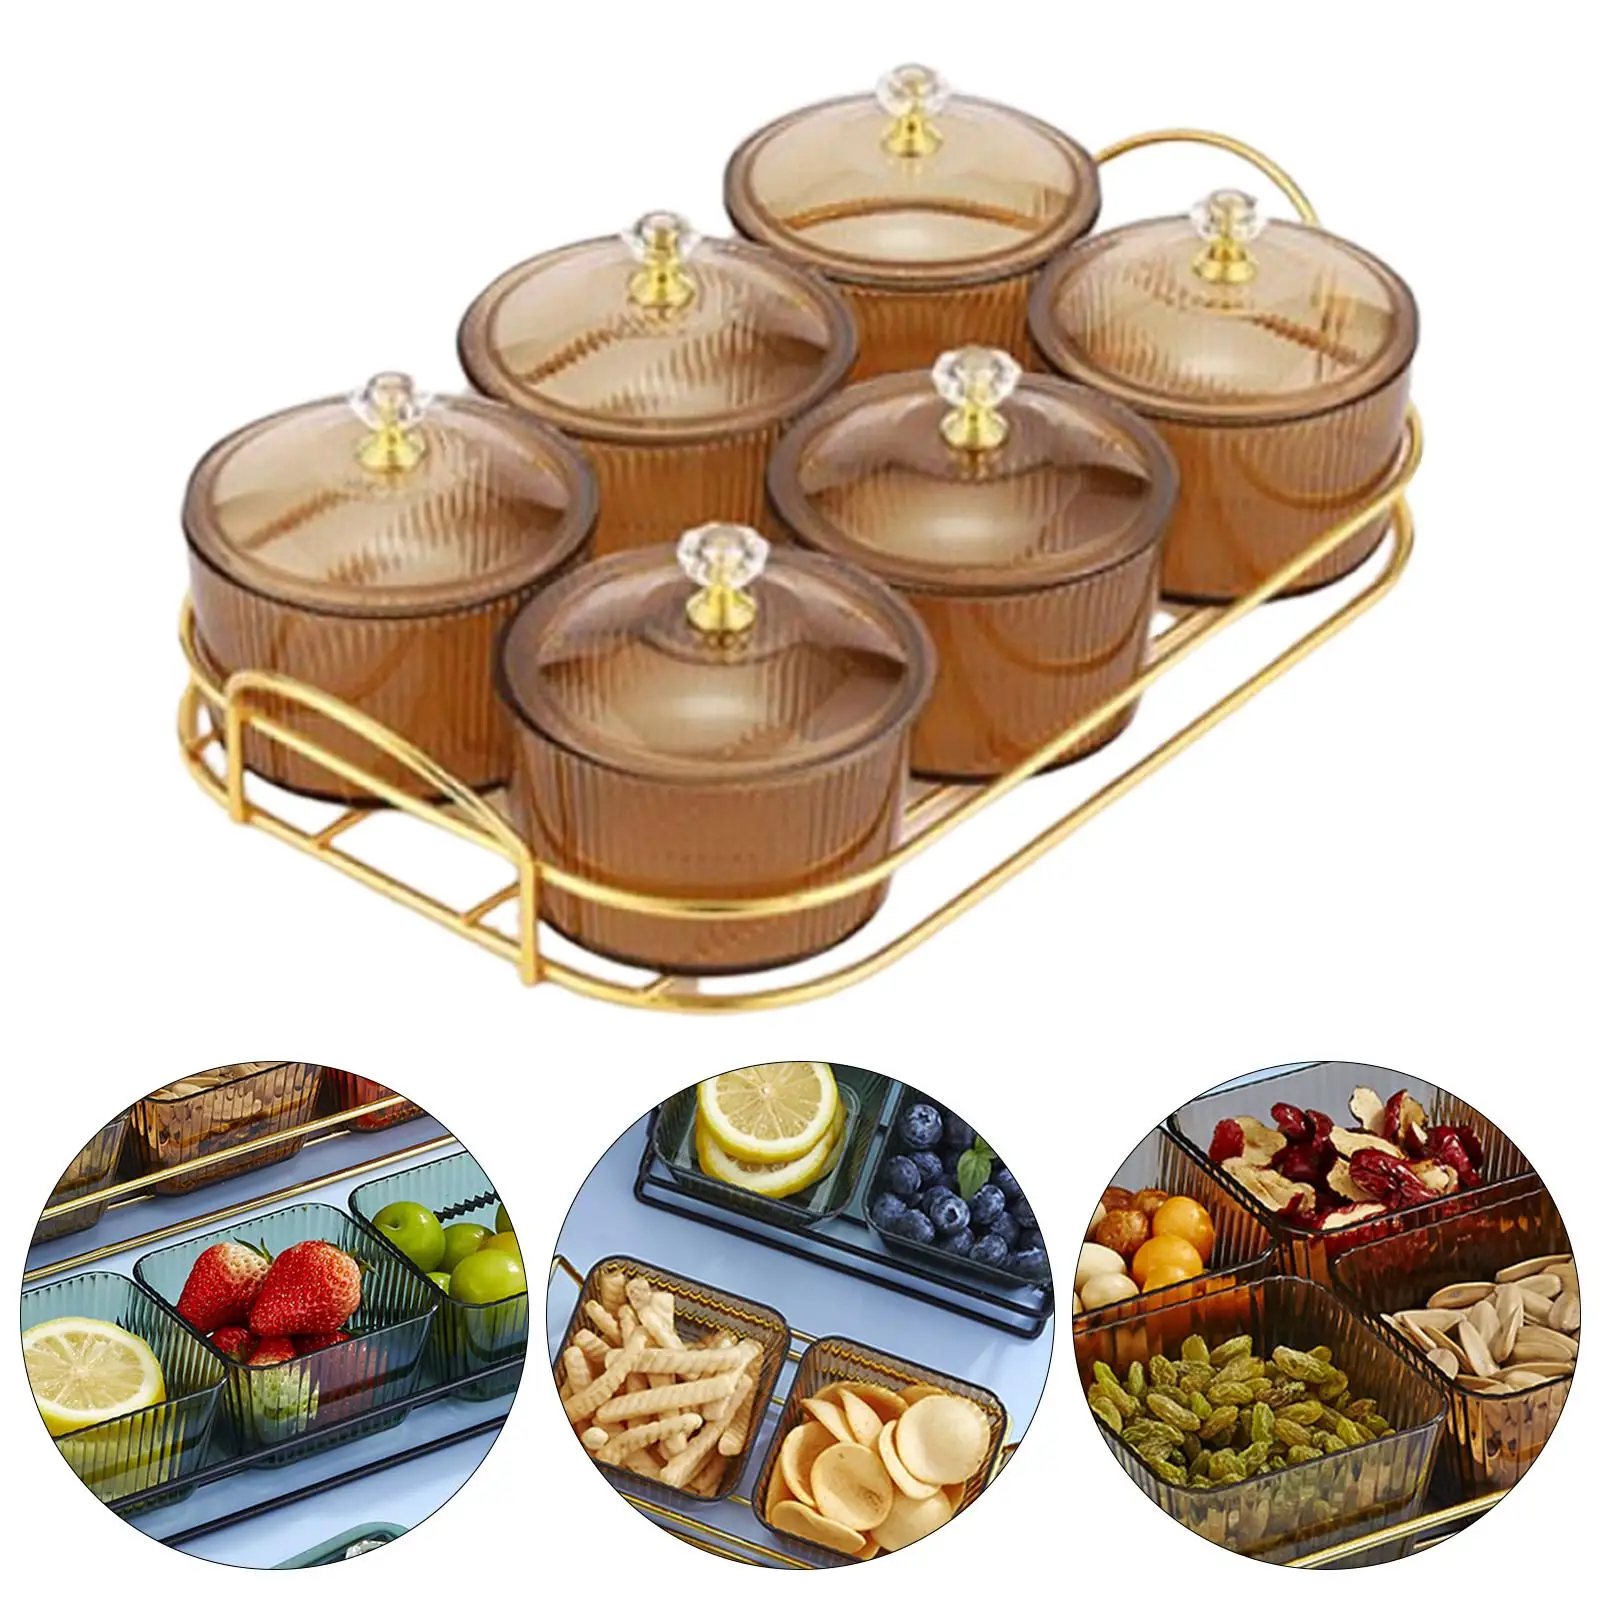 Candy and Nut Serving Container Appetizer Tray and 6 Bowls Fruit Serving Platter for Appetizer Caddy Nuts